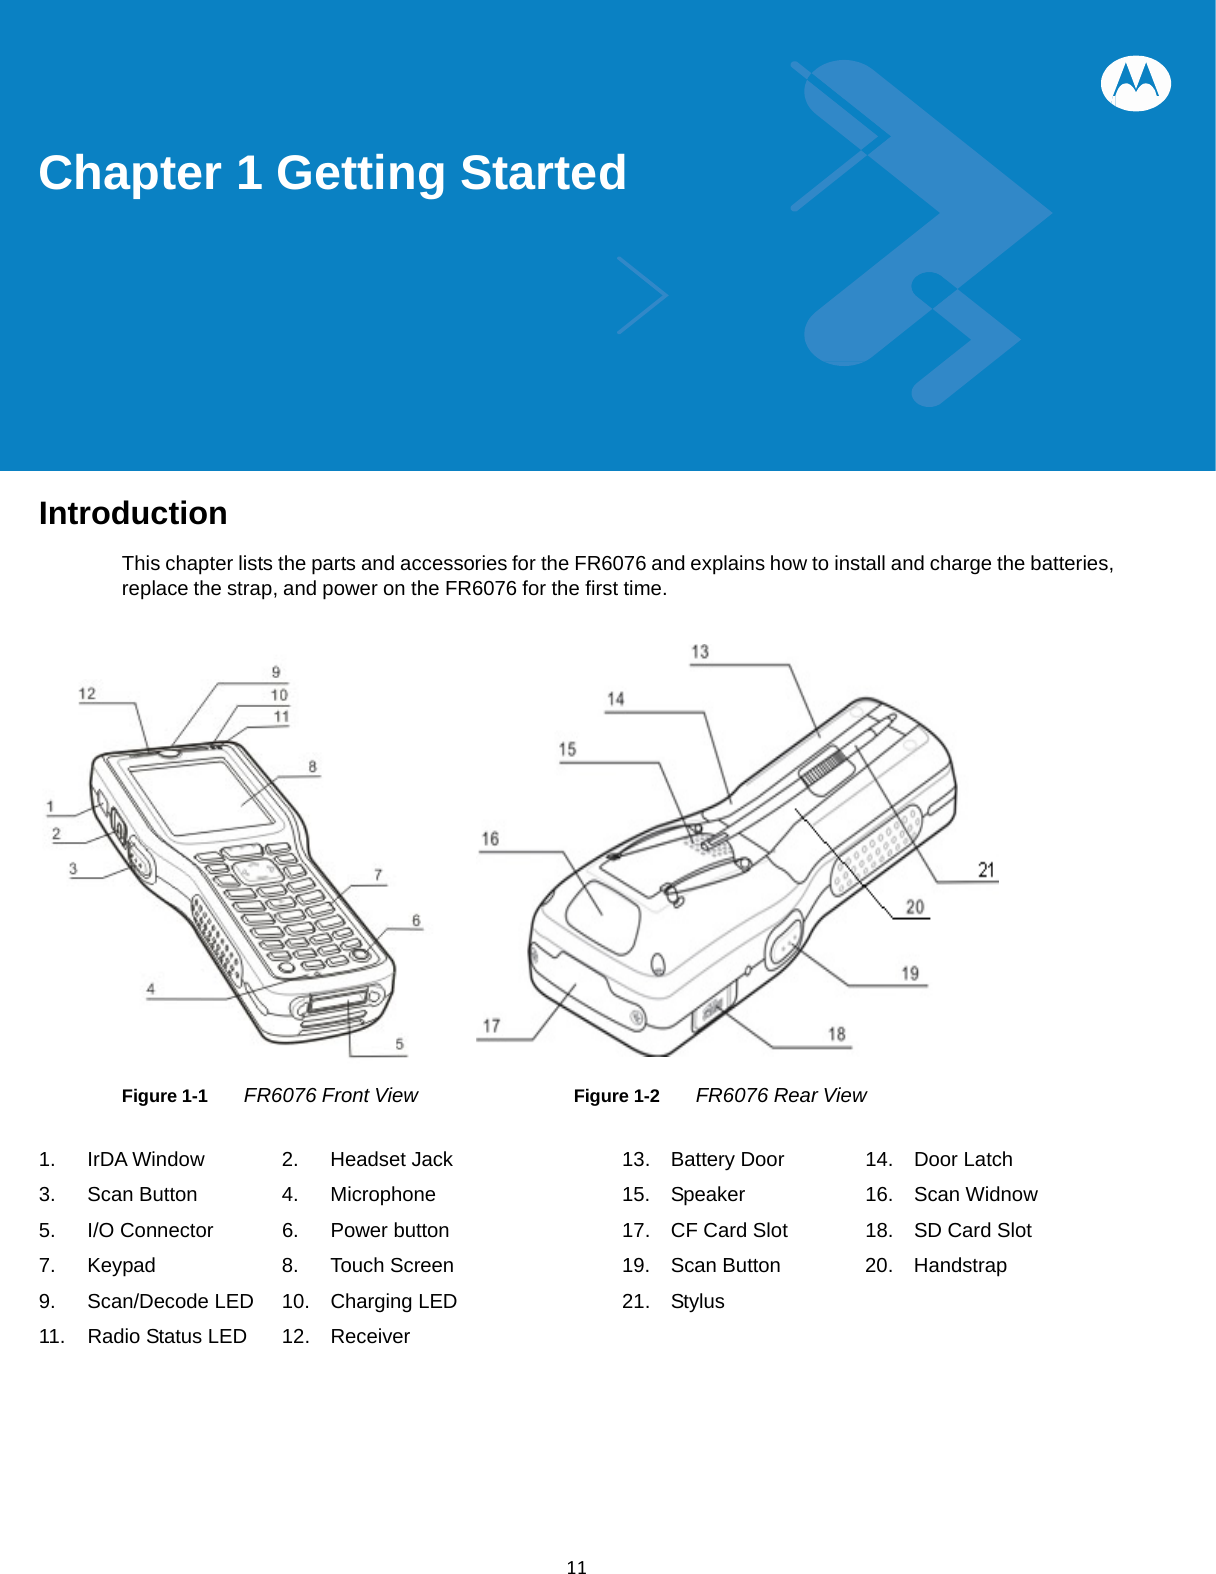  11Chapter 1 Getting Started            Introduction  This chapter lists the parts and accessories for the FR6076 and explains how to install and charge the batteries, replace the strap, and power on the FR6076 for the first time.                                            Figure 1-1      FR6076 Front View    Figure 1-2    FR6076 Rear View   1.  IrDA Window     2.  Headset Jack              13.  Battery Door     14.  Door Latch 3. Scan Button    4. Microphone    15. Speaker    16. Scan Widnow  5. I/O Connector   6. Power button    17. CF Card Slot  18. SD Card Slot 7.  Keypad          8.  Touch Screen        19.  Scan Button     20.  Handstrap  9. Scan/Decode LED   10. Charging LED    21. Stylus     11. Radio Status LED 12.  Receiver                      